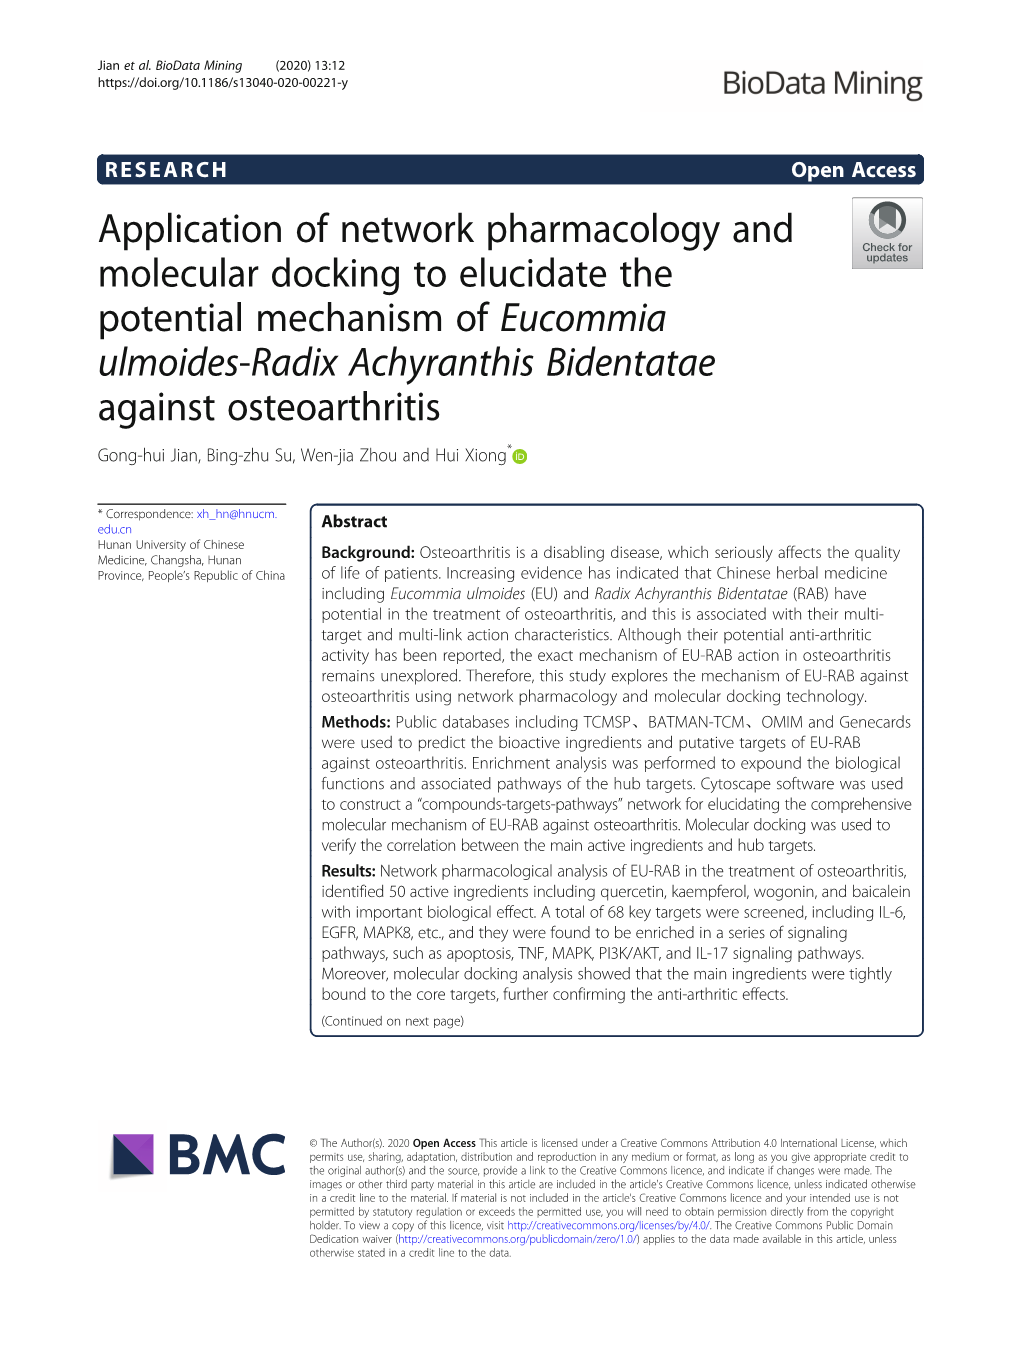 Application of Network Pharmacology and Molecular Docking to Elucidate